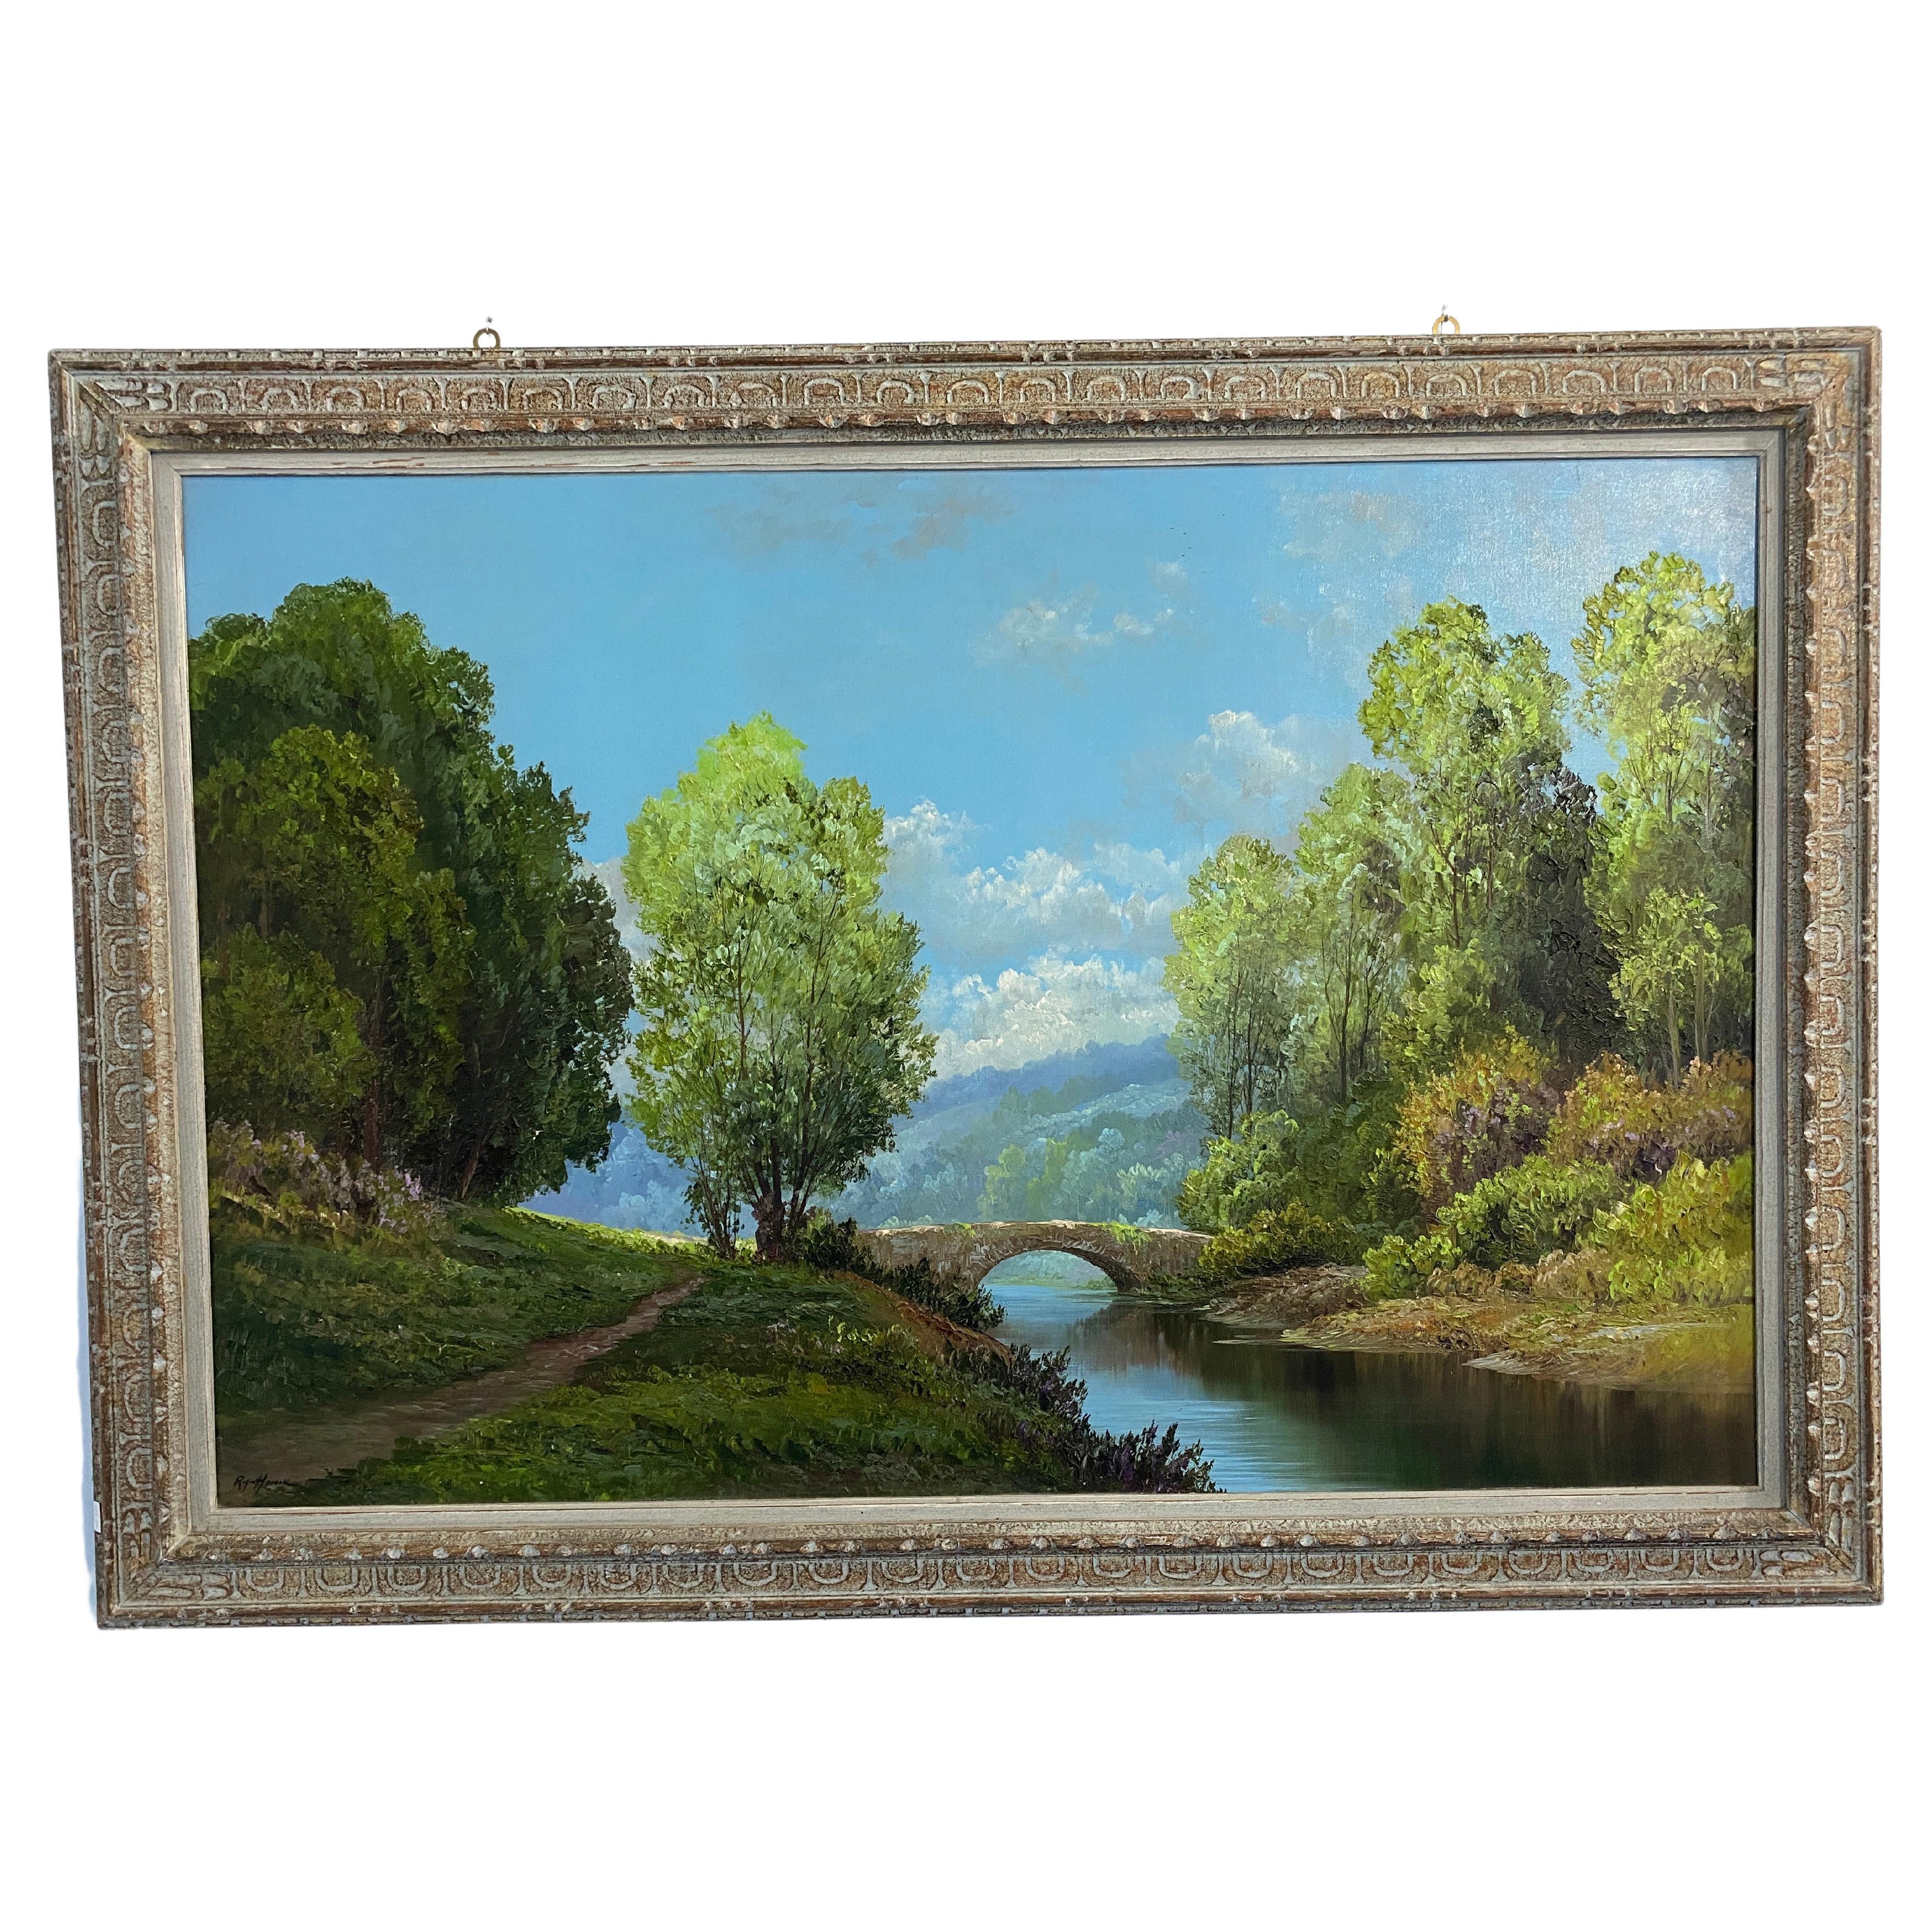 Oil painting "Landscape with bridge" signed, France 1960